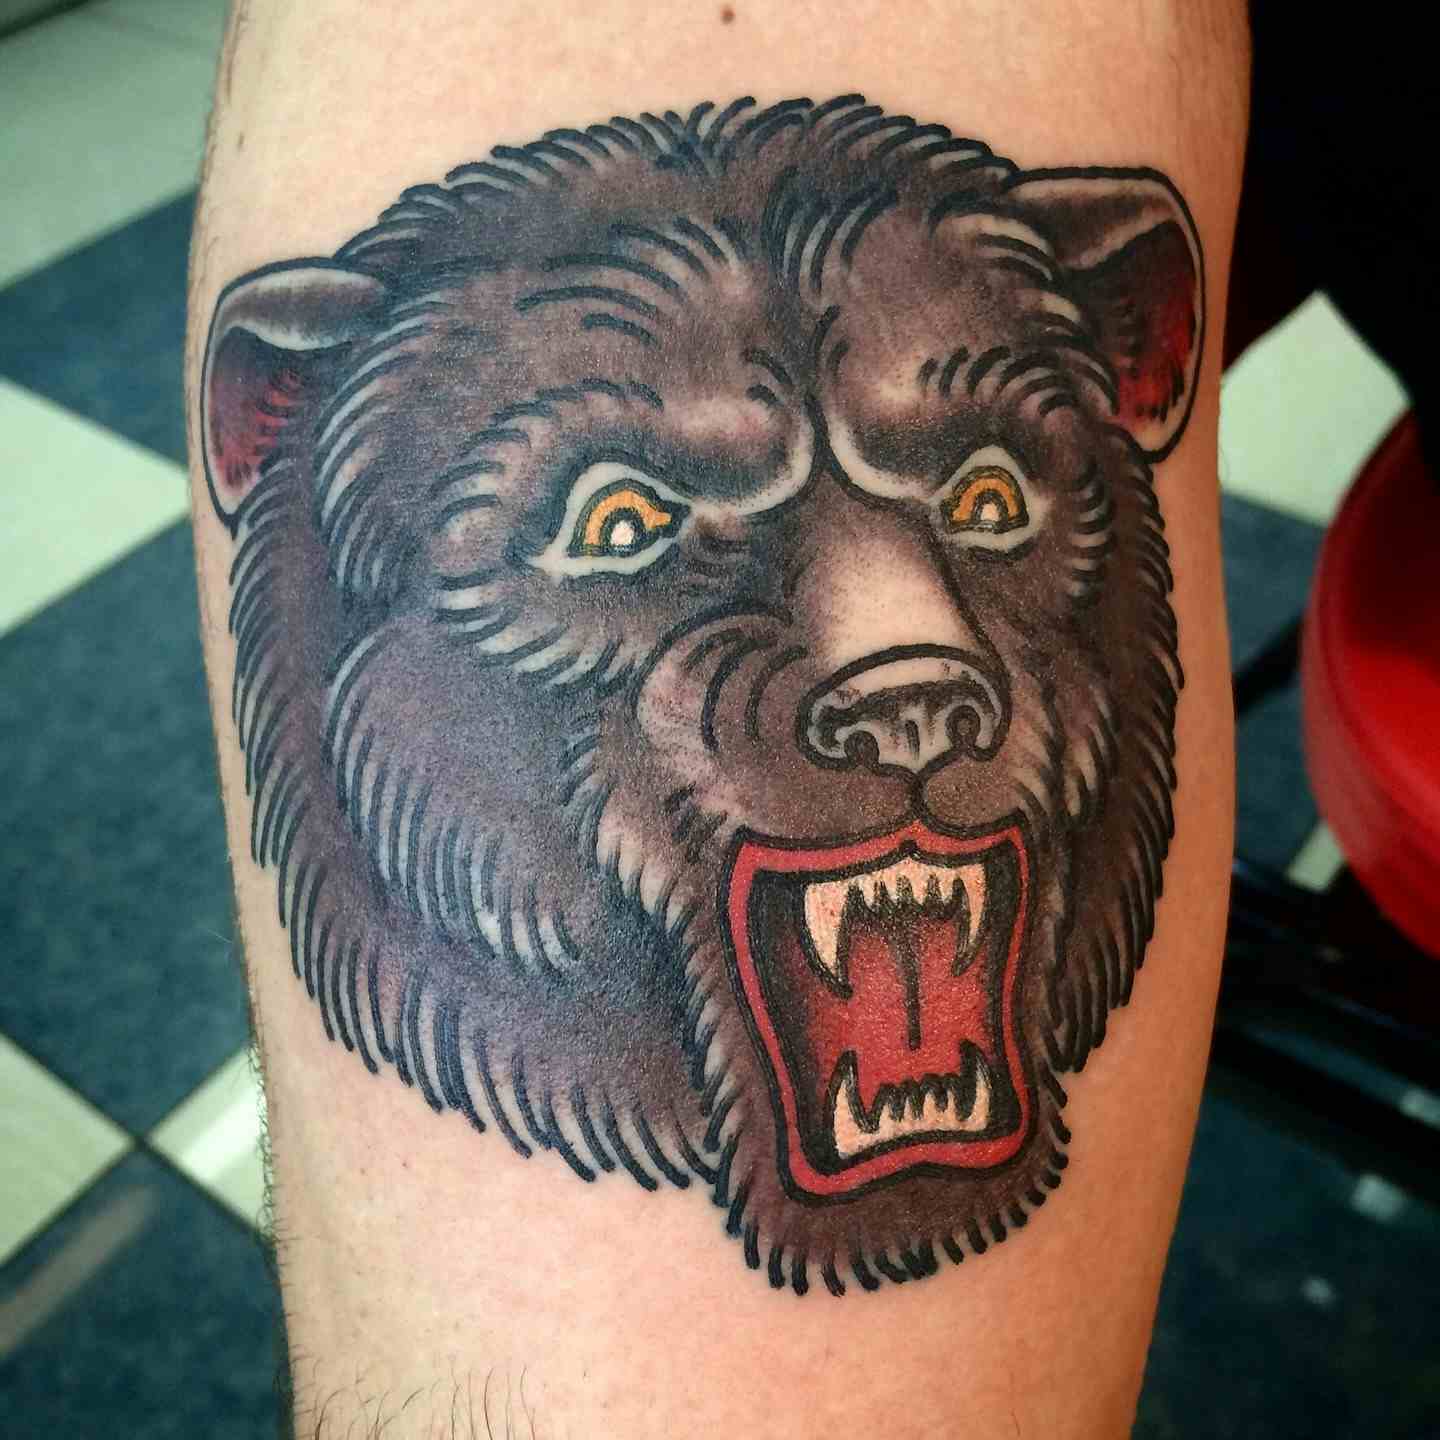 Grizzly bear tattoo